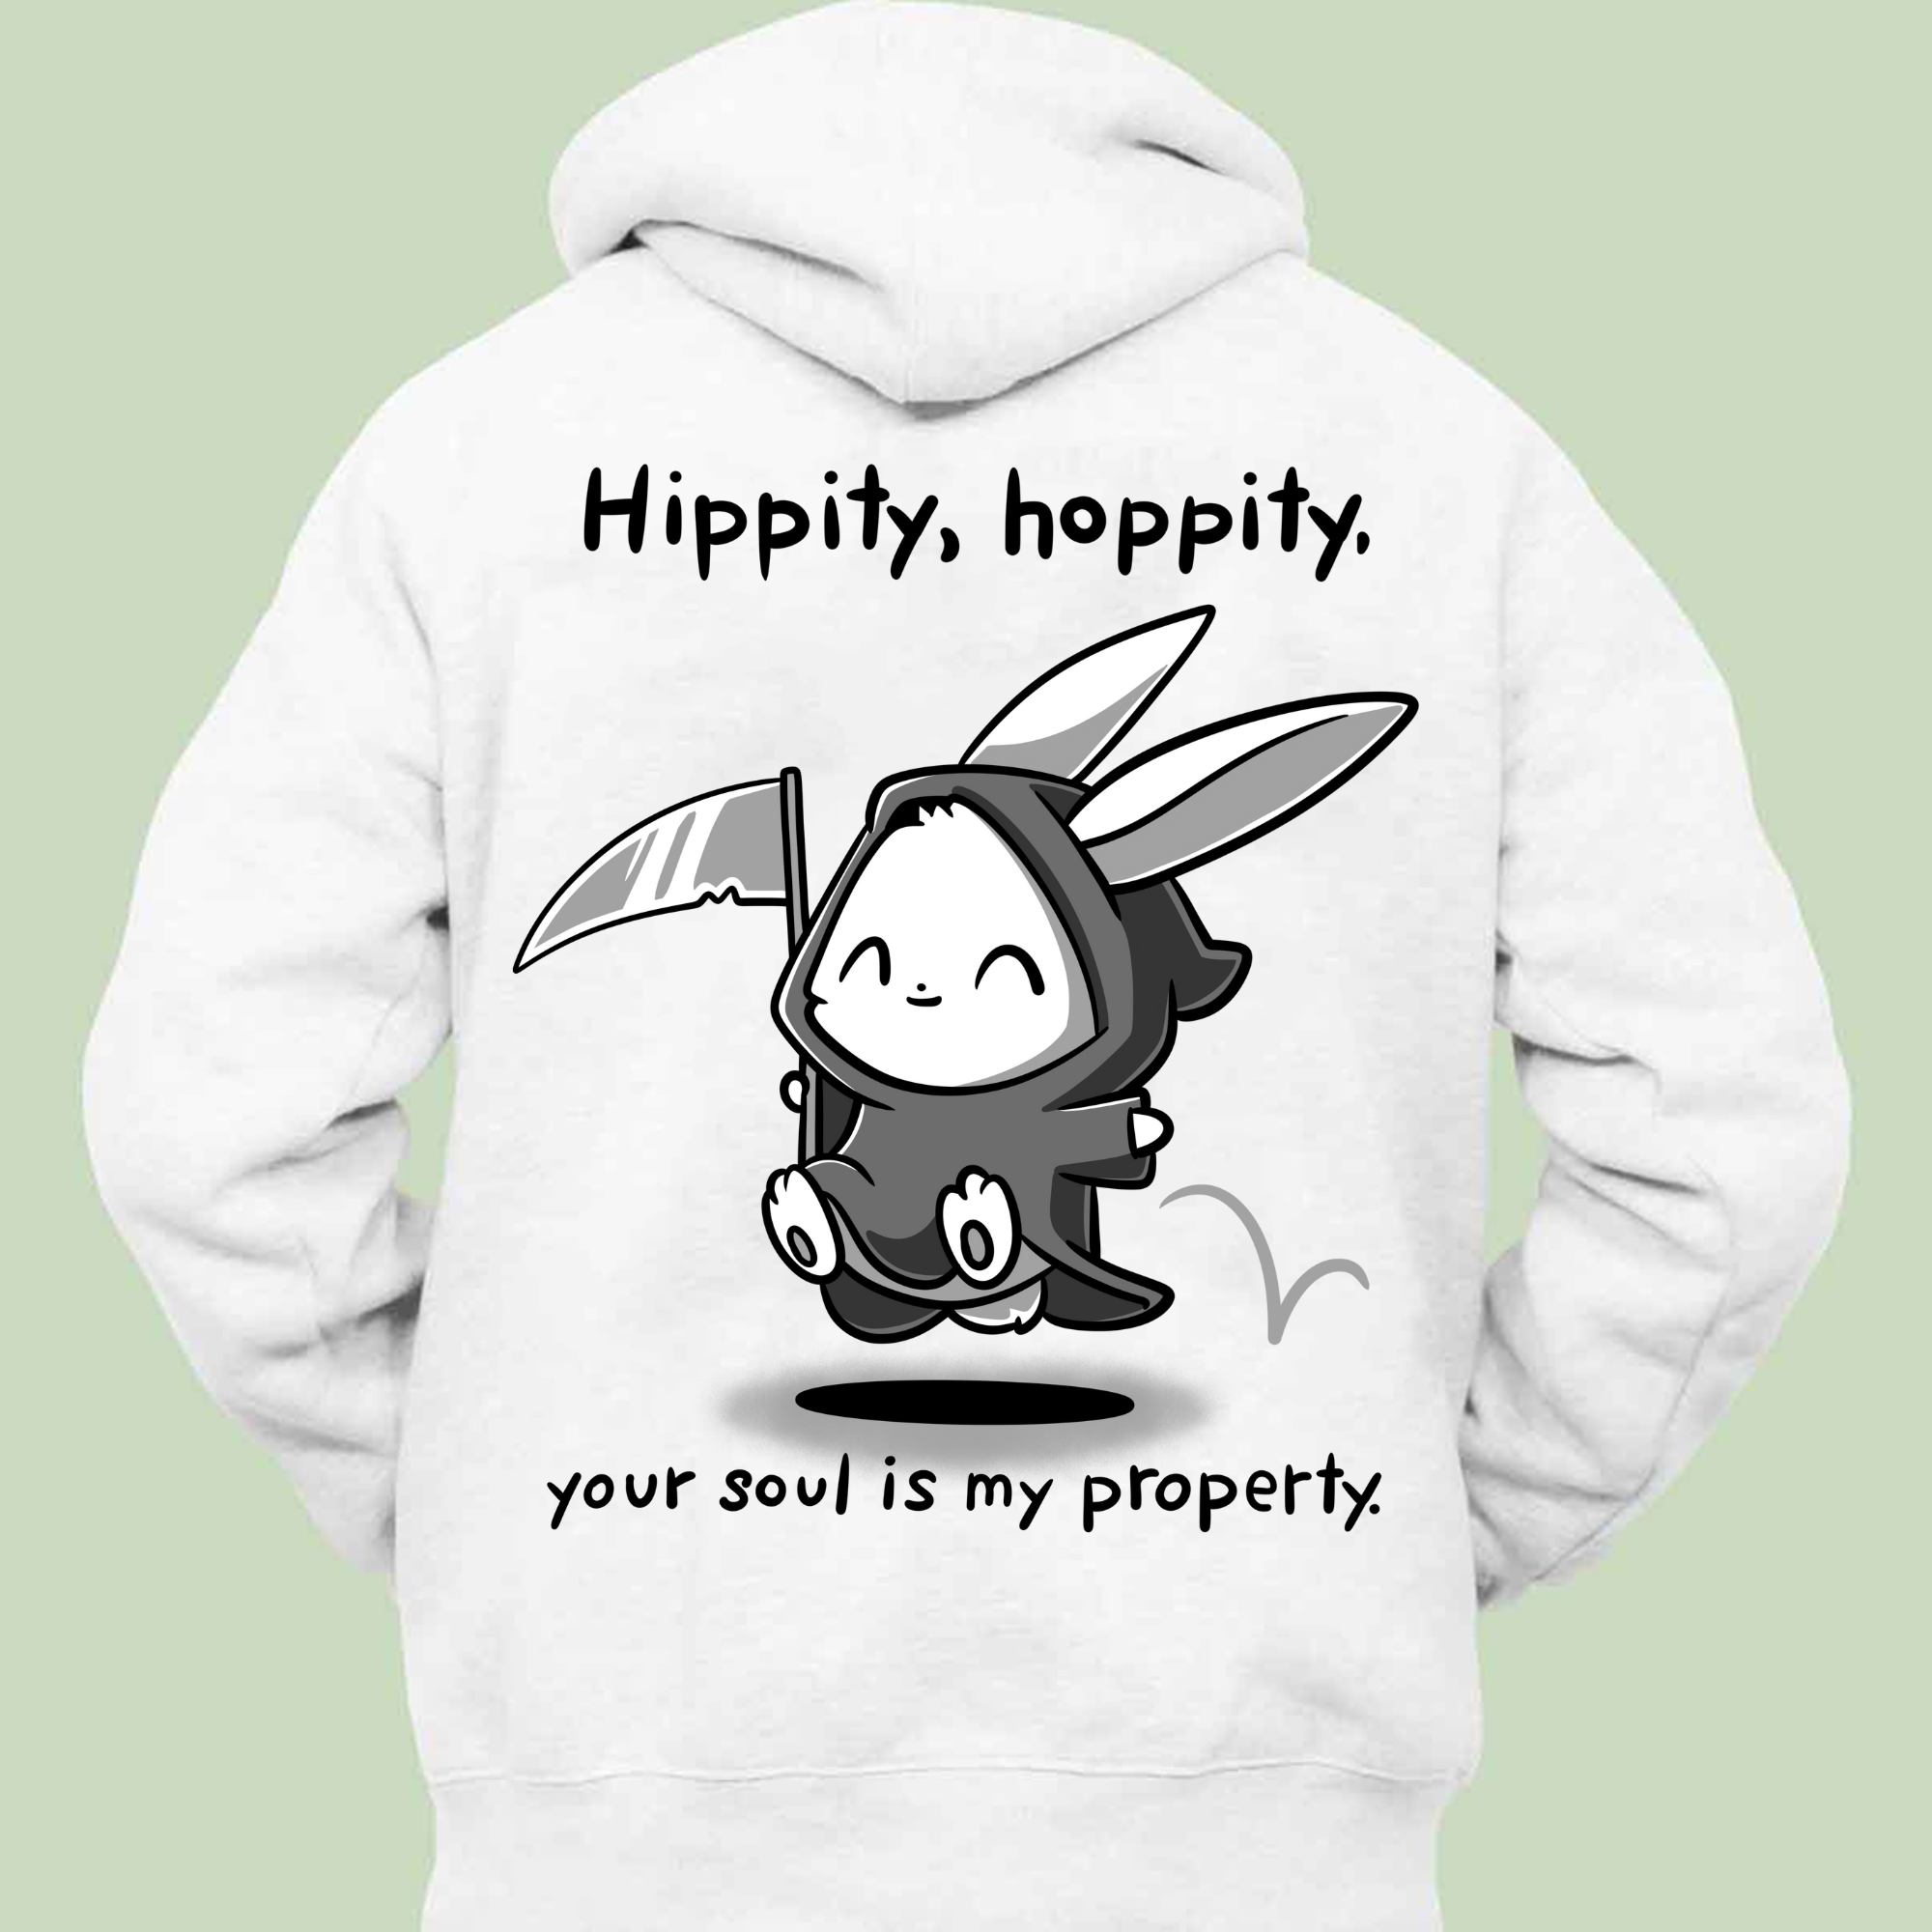 Your Soul Is My Property - Hoodie Zipper